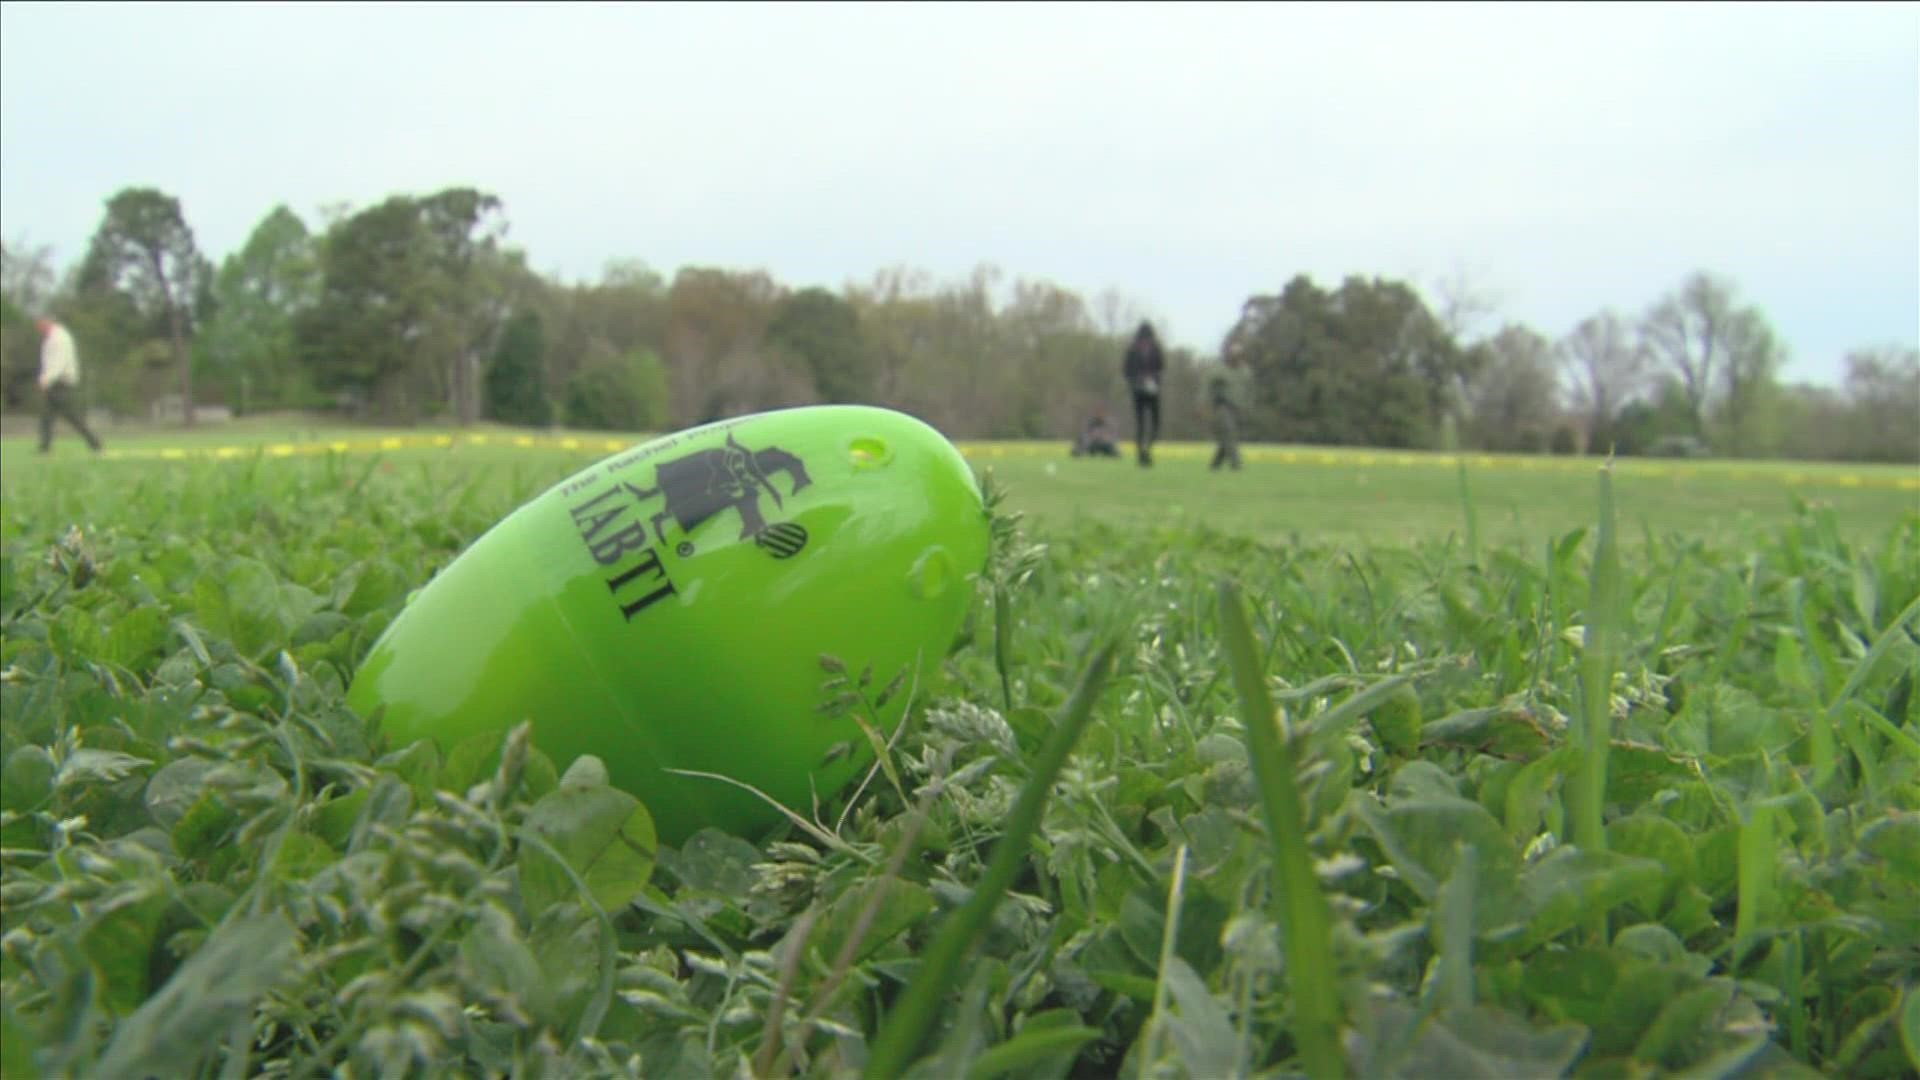 The Memphis Beeping Egg Hunt Explosion was put on by the county bomb squad and Clovernook Center for the Blind and Visually Impaired at Overton Park.